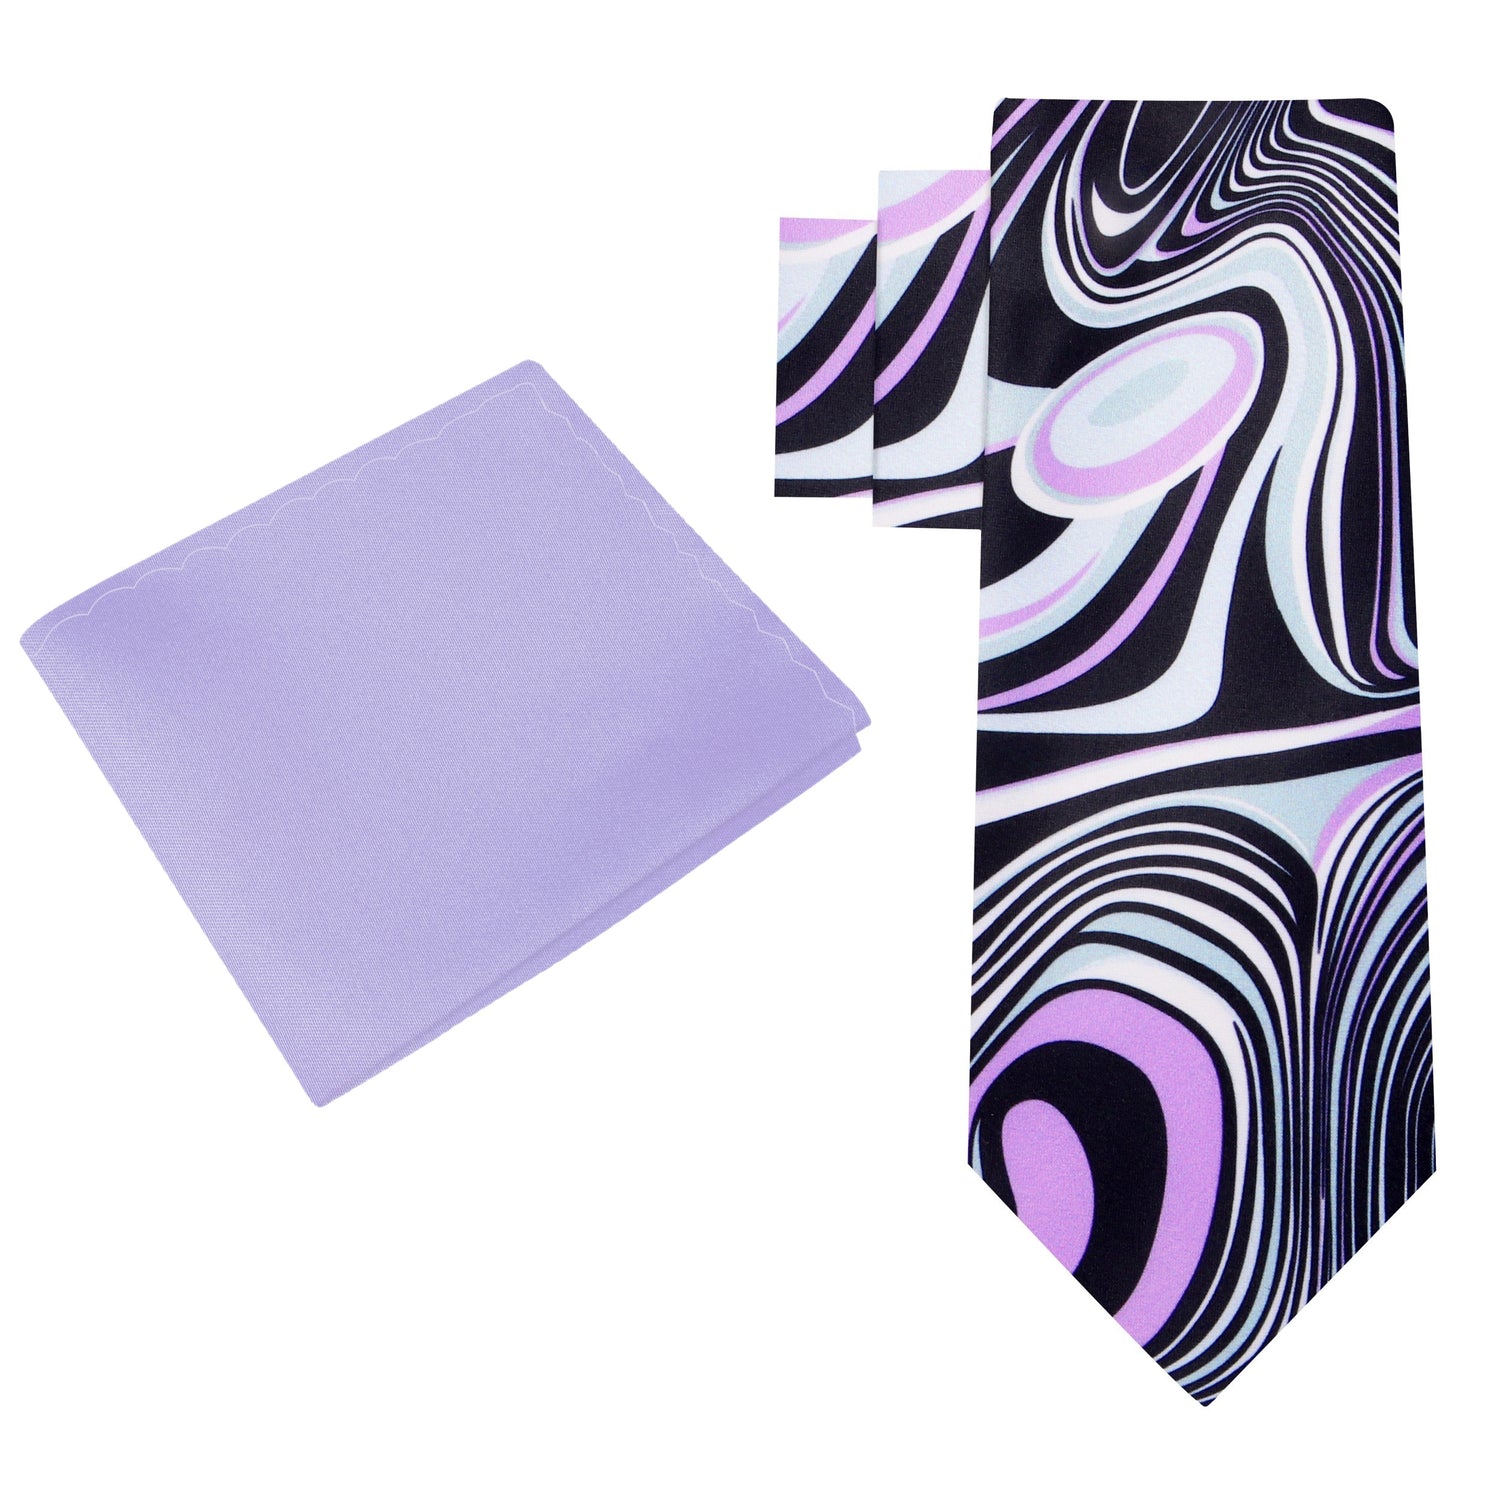 Alt View: Pink, Light Blue, Black Abstract Tie and Light Purple Square